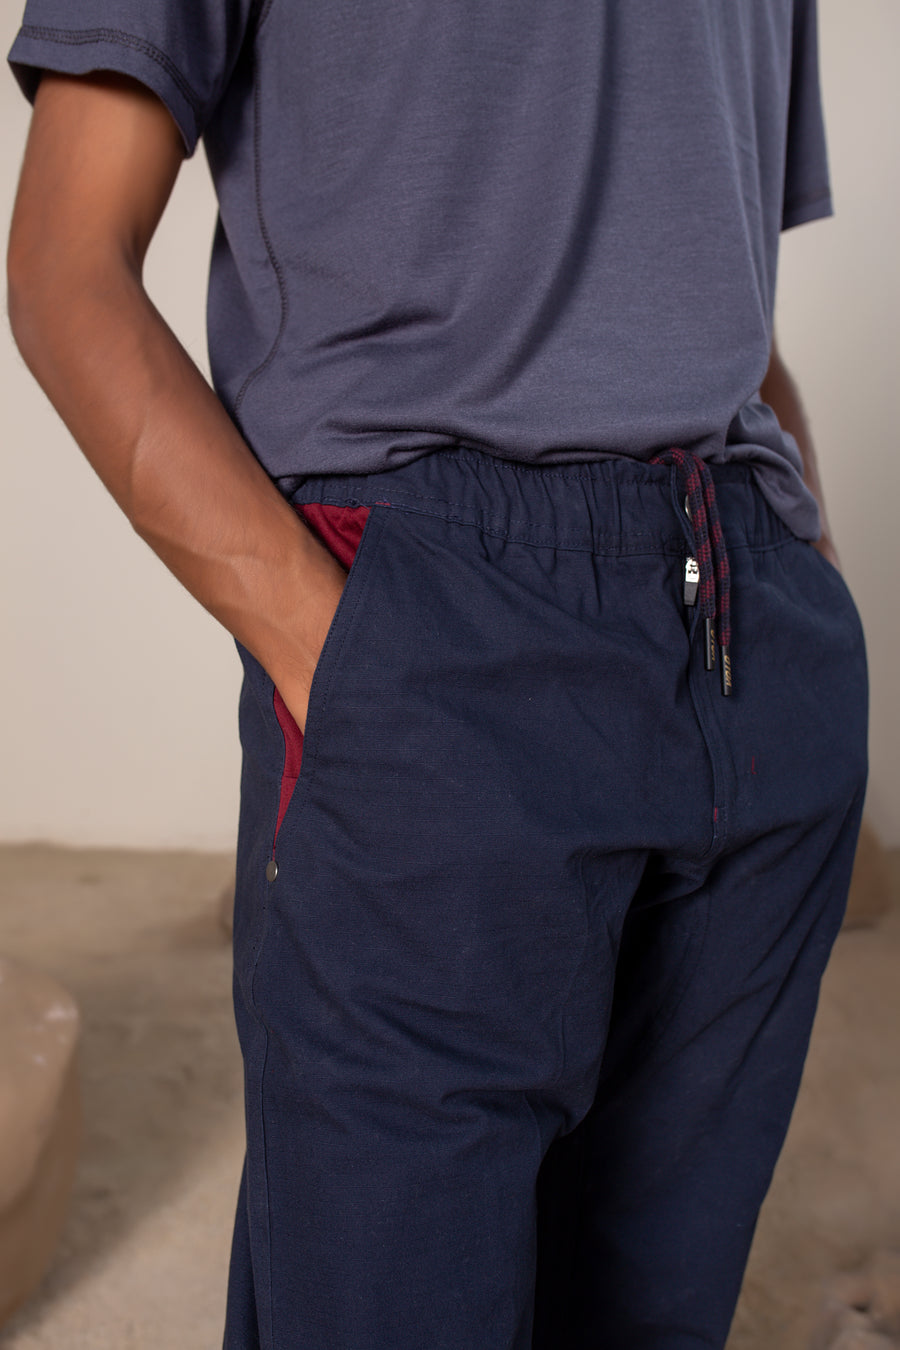 Men's Yosemite Rip Stop in Navy | VOLO Apparel | Made with a durable stretch rip stop, the Yosemite Rip Stop pant is our ultimate six pocket lifestyle pant. Featuring a 3 point gusset, snap button security pockets, 2 zipper pockets and the comfort of cotton ripstop, these are your go to adventure pants. Designed to take you from the summit, to the city.